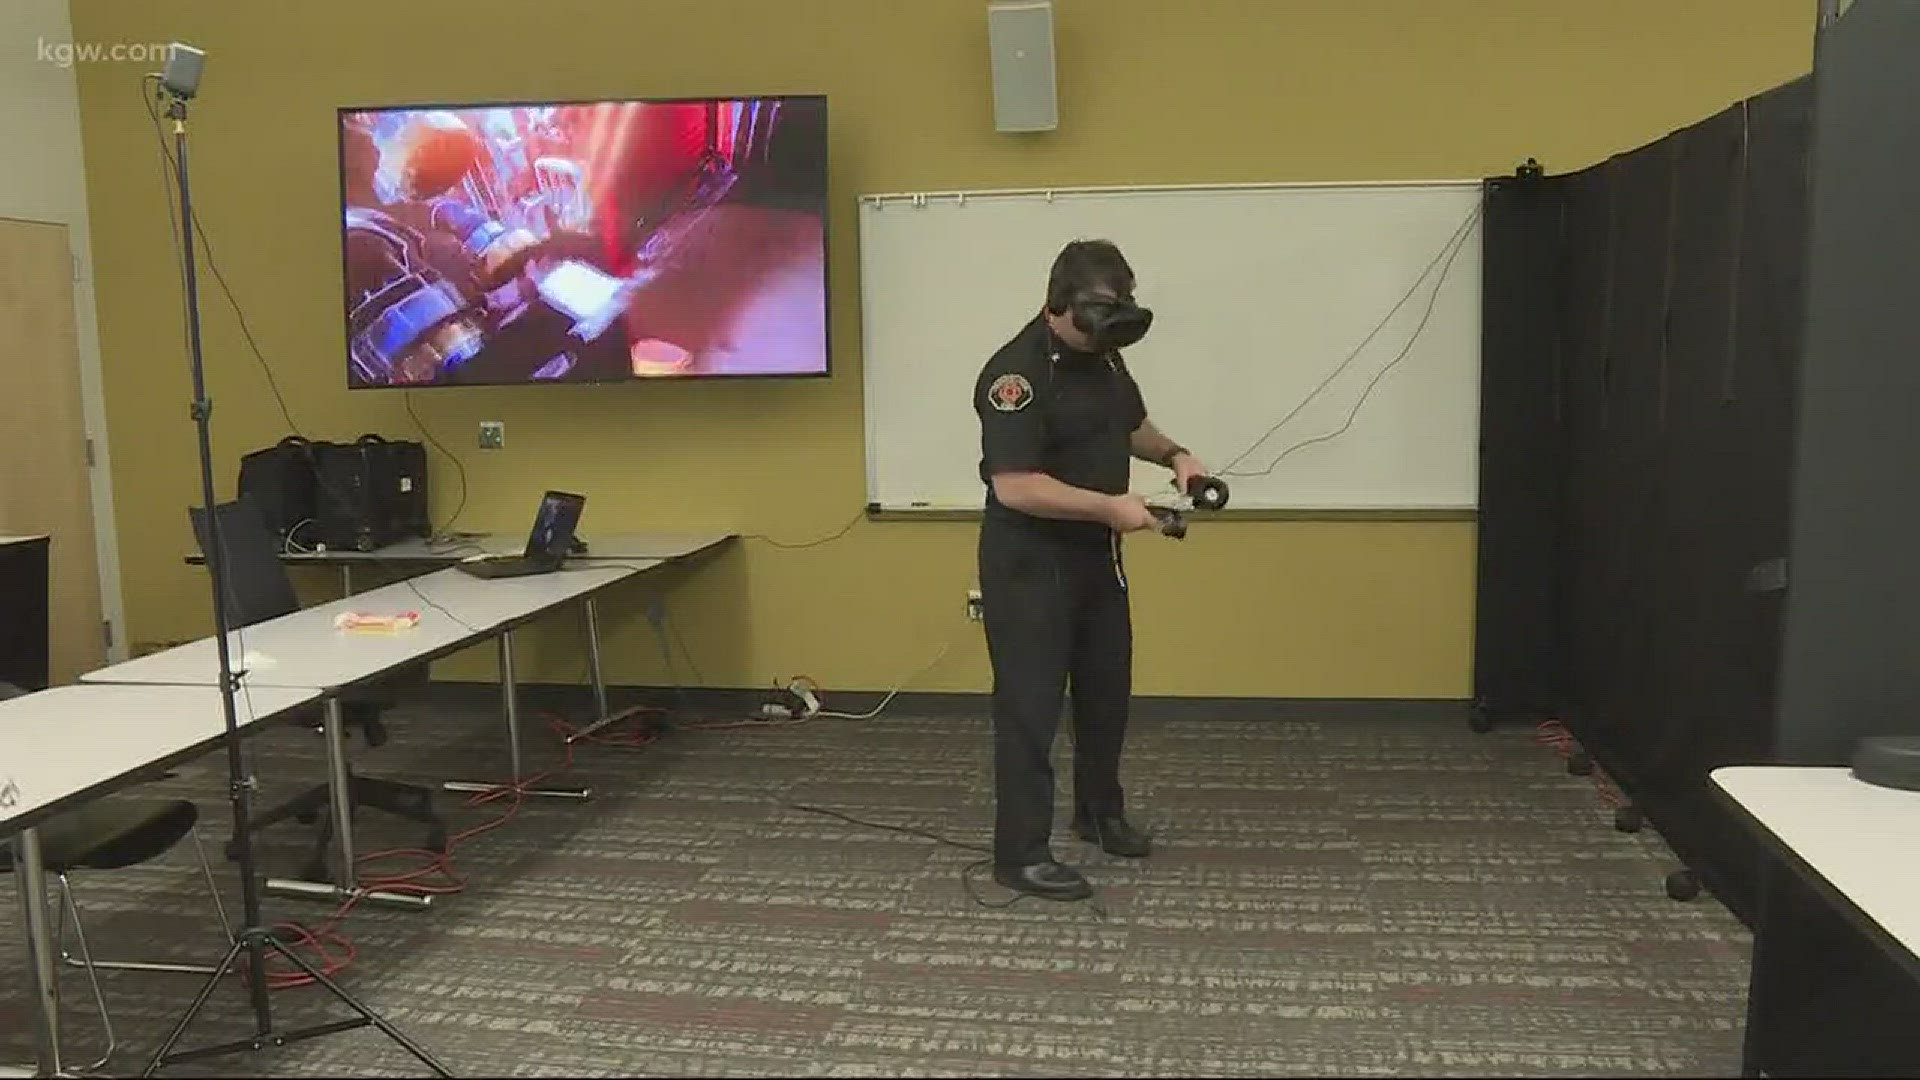 Using virtual reality to train for disasters